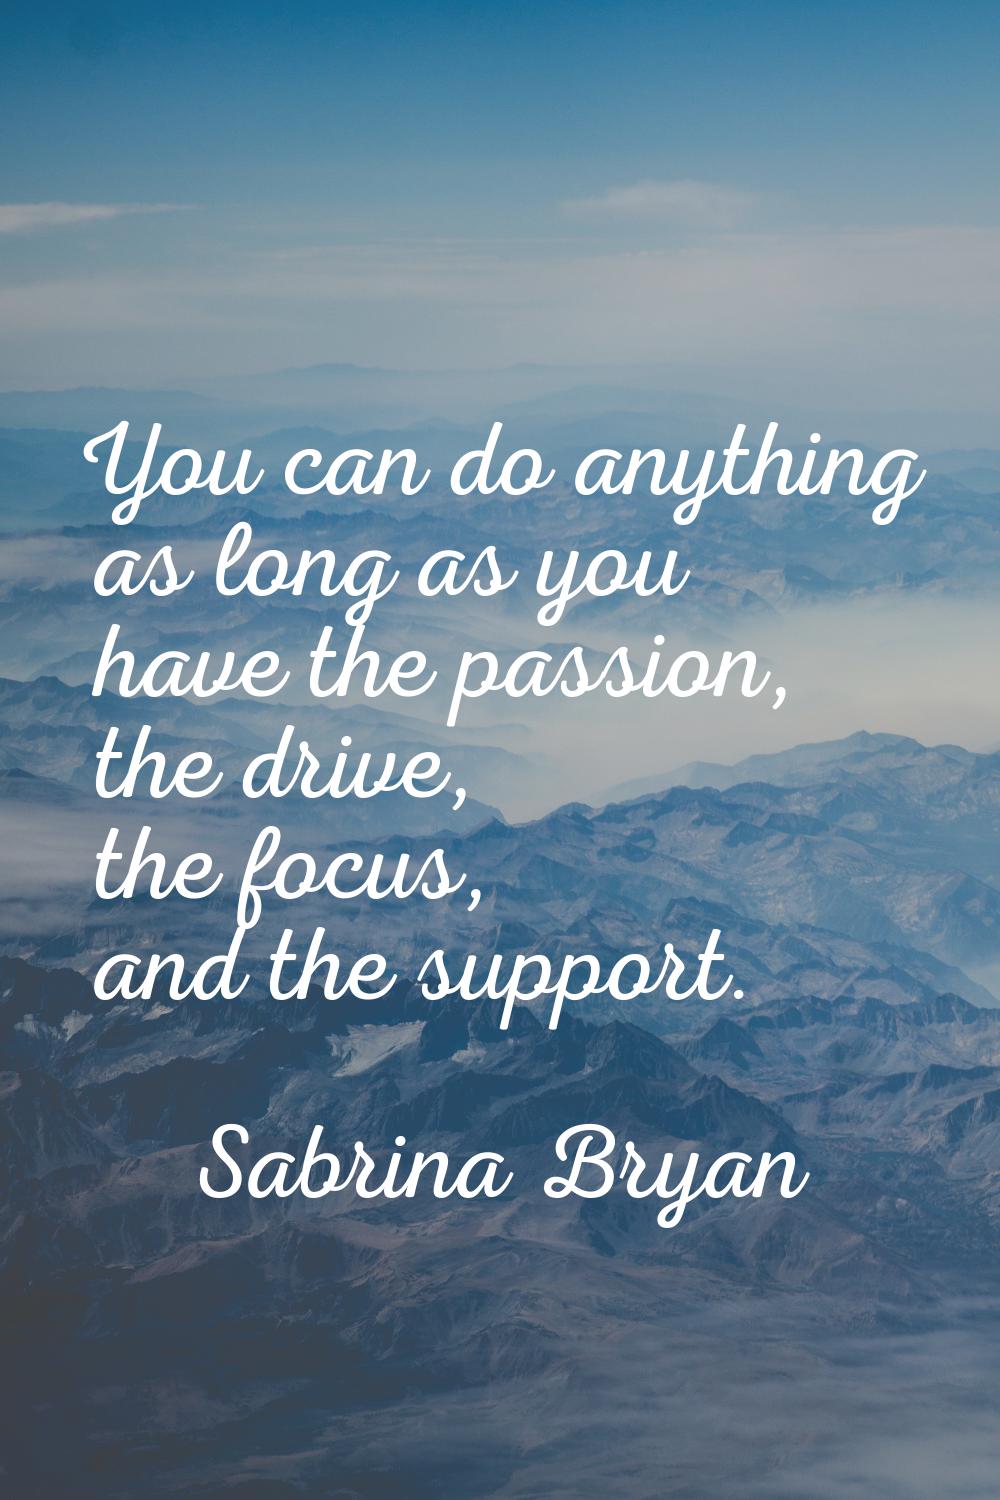 You can do anything as long as you have the passion, the drive, the focus, and the support.